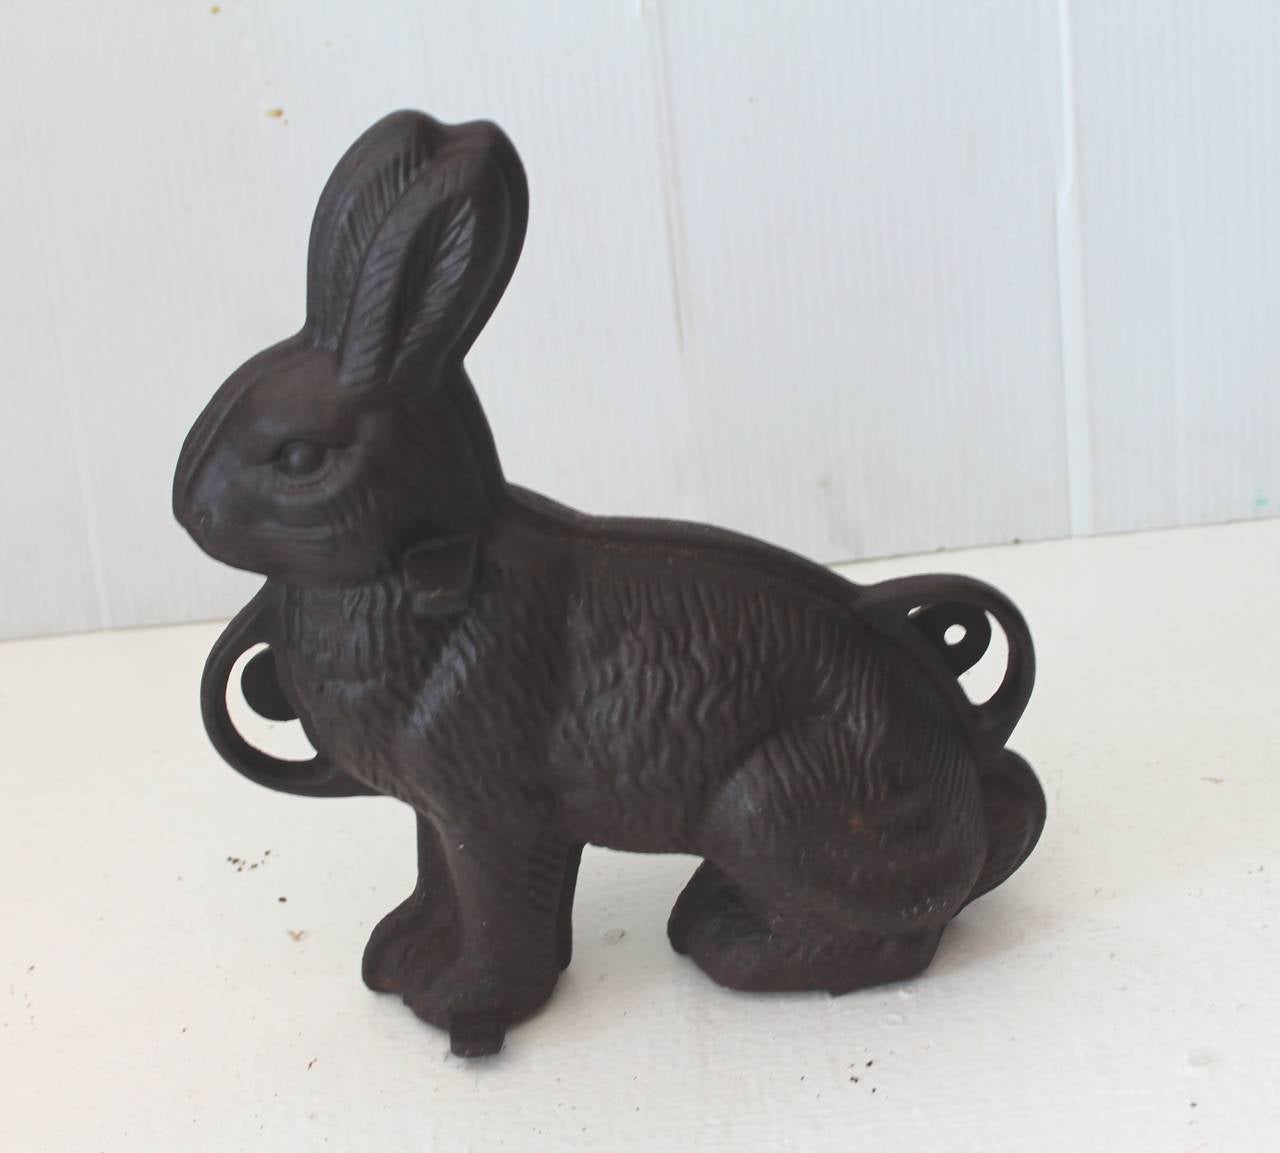 This signed iron rabbit is marked: GRISWOLD MFT. COMPANY, ERIE, PENNSYLVANIA. The last quarter of the 19th century and has a worn distressed patina. This is a two-piece chocolate mold was used for making the chocolate rabbits for Easter. Just in